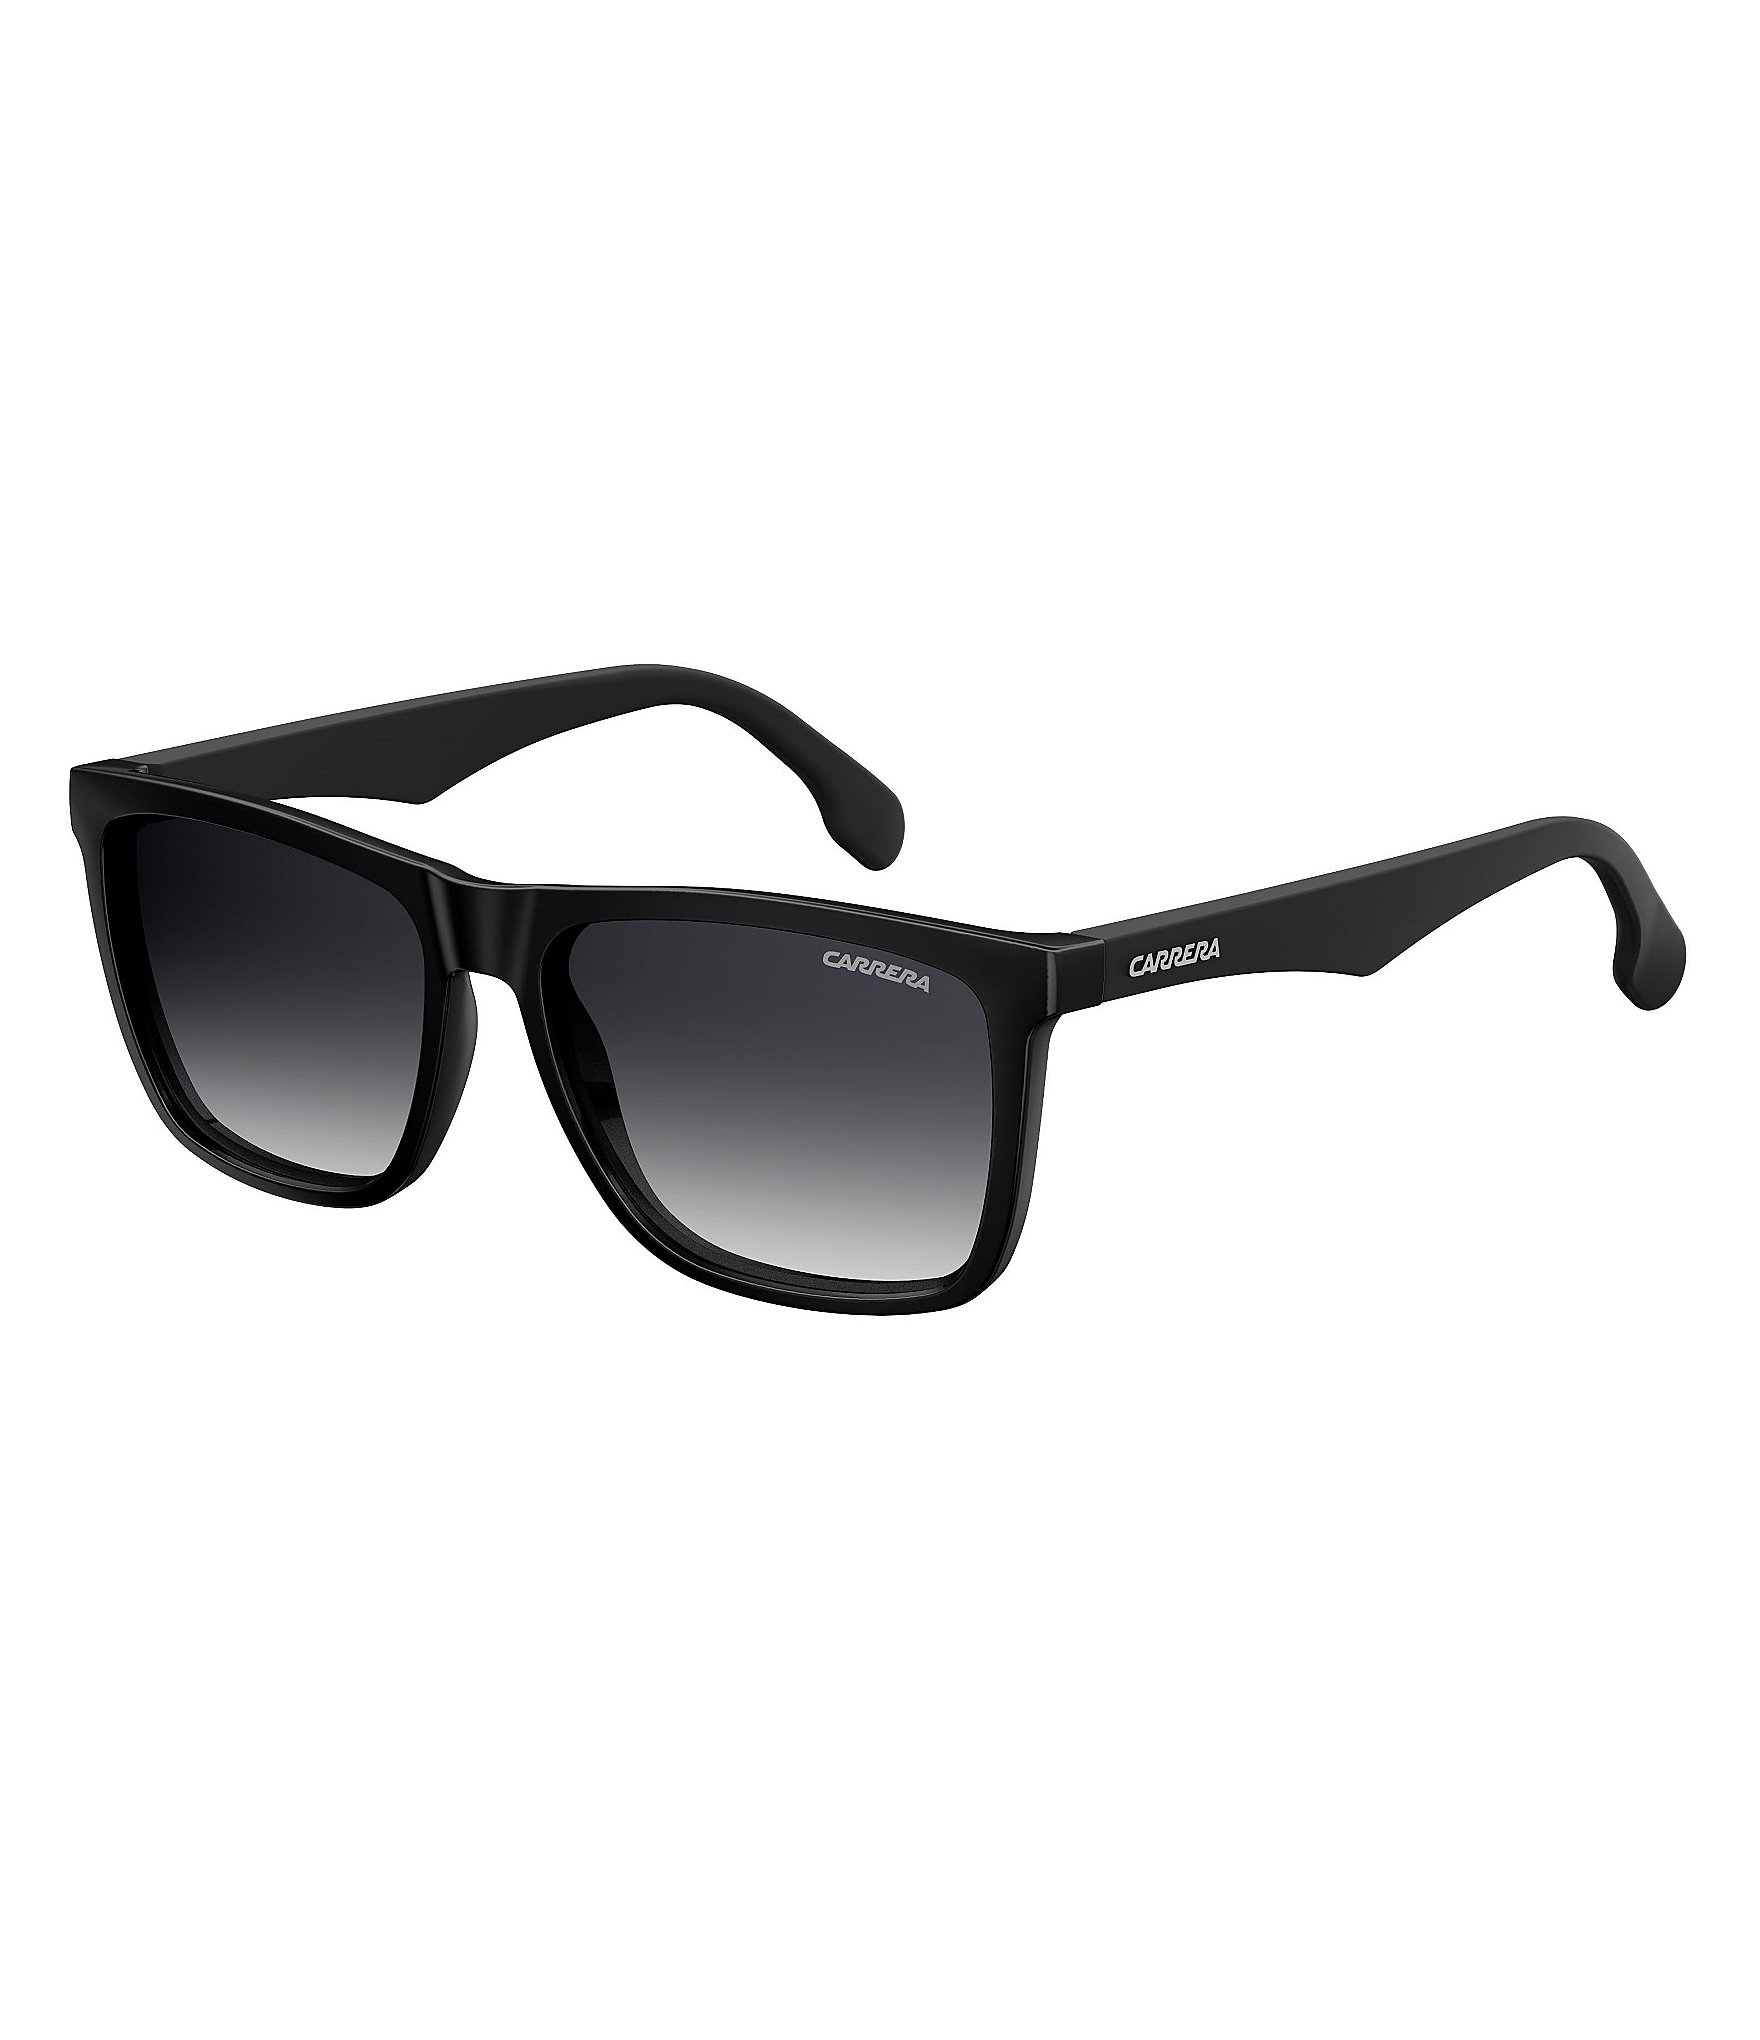 Carrera Sunglasses 1056/S 0OIT-9O - Best Price and Available as  Prescription Sunglasses